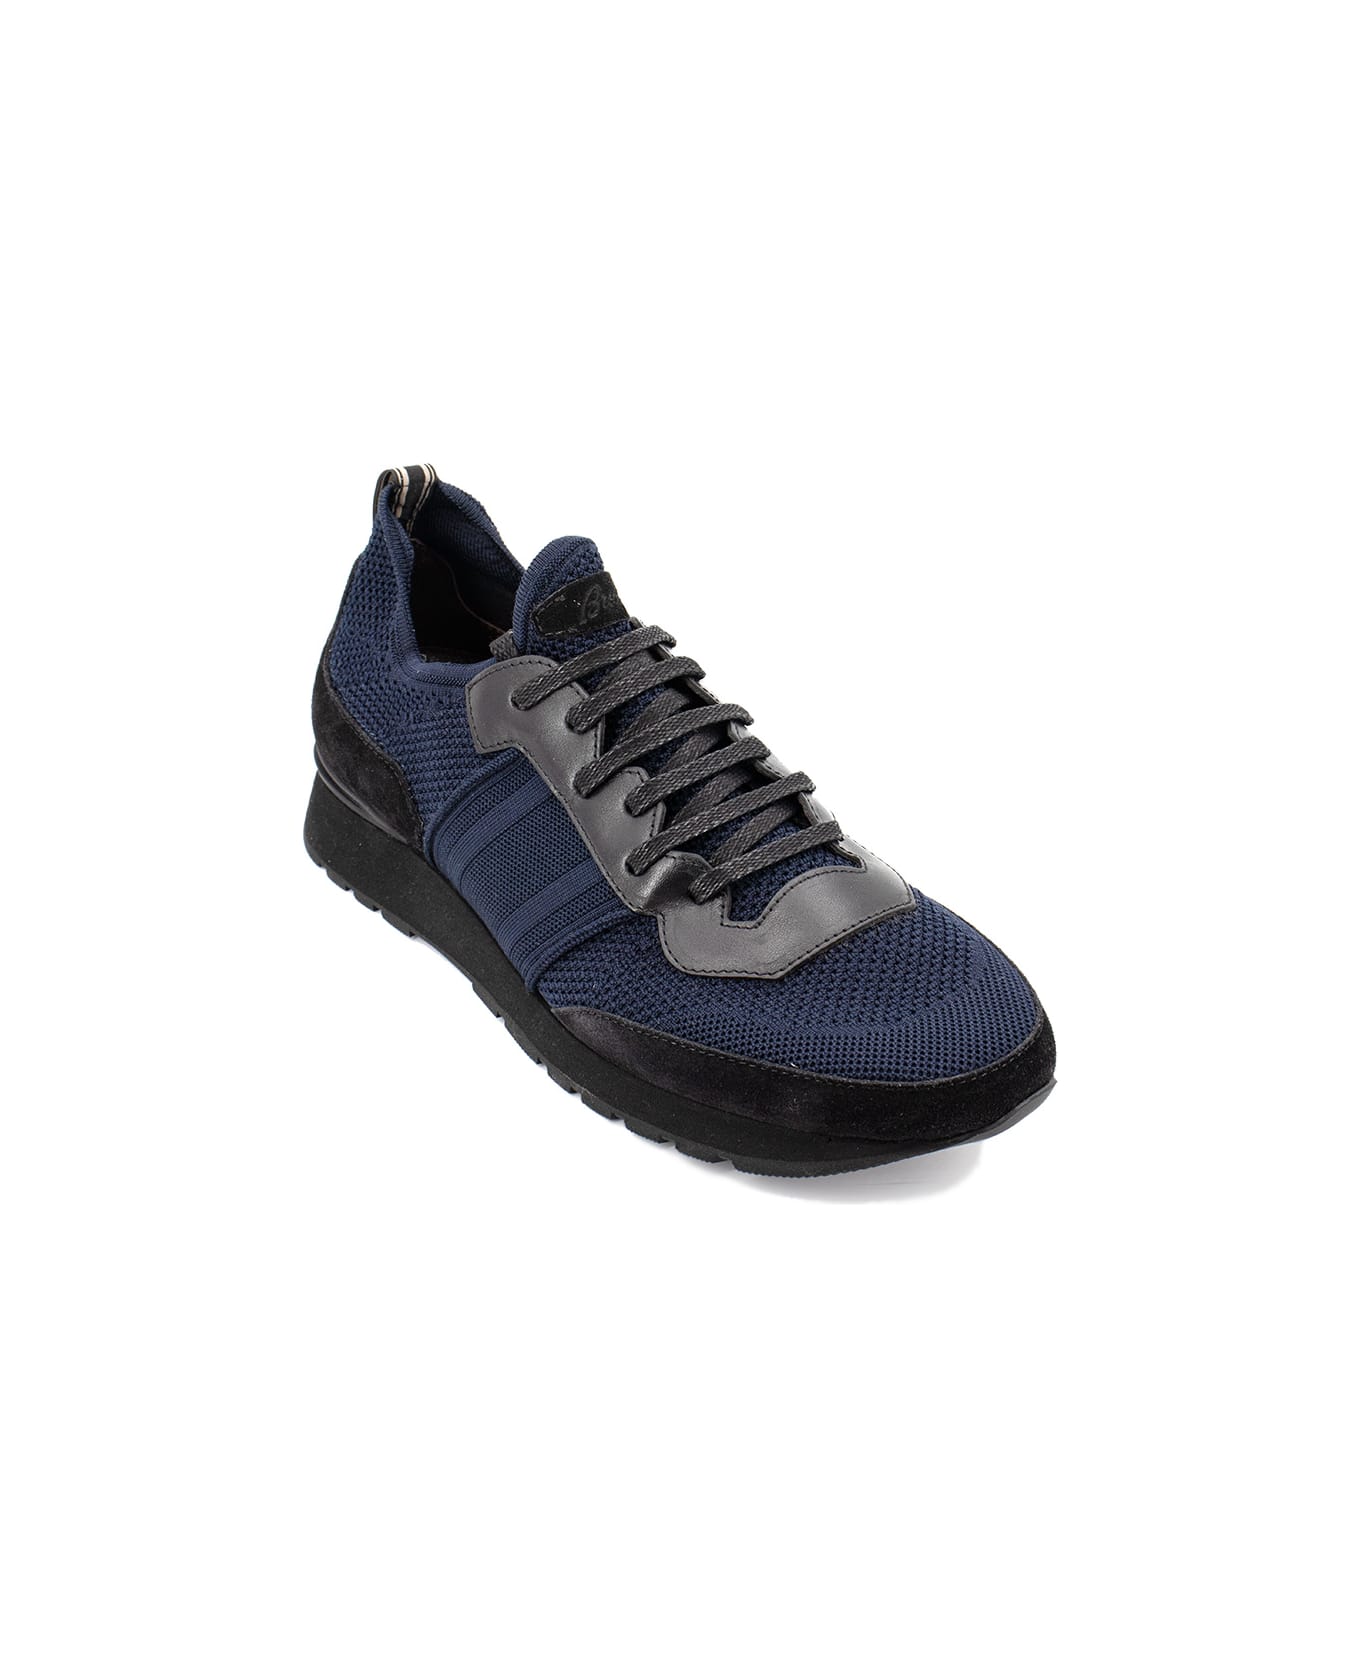 Brioni Sneakers - ALL NAVY